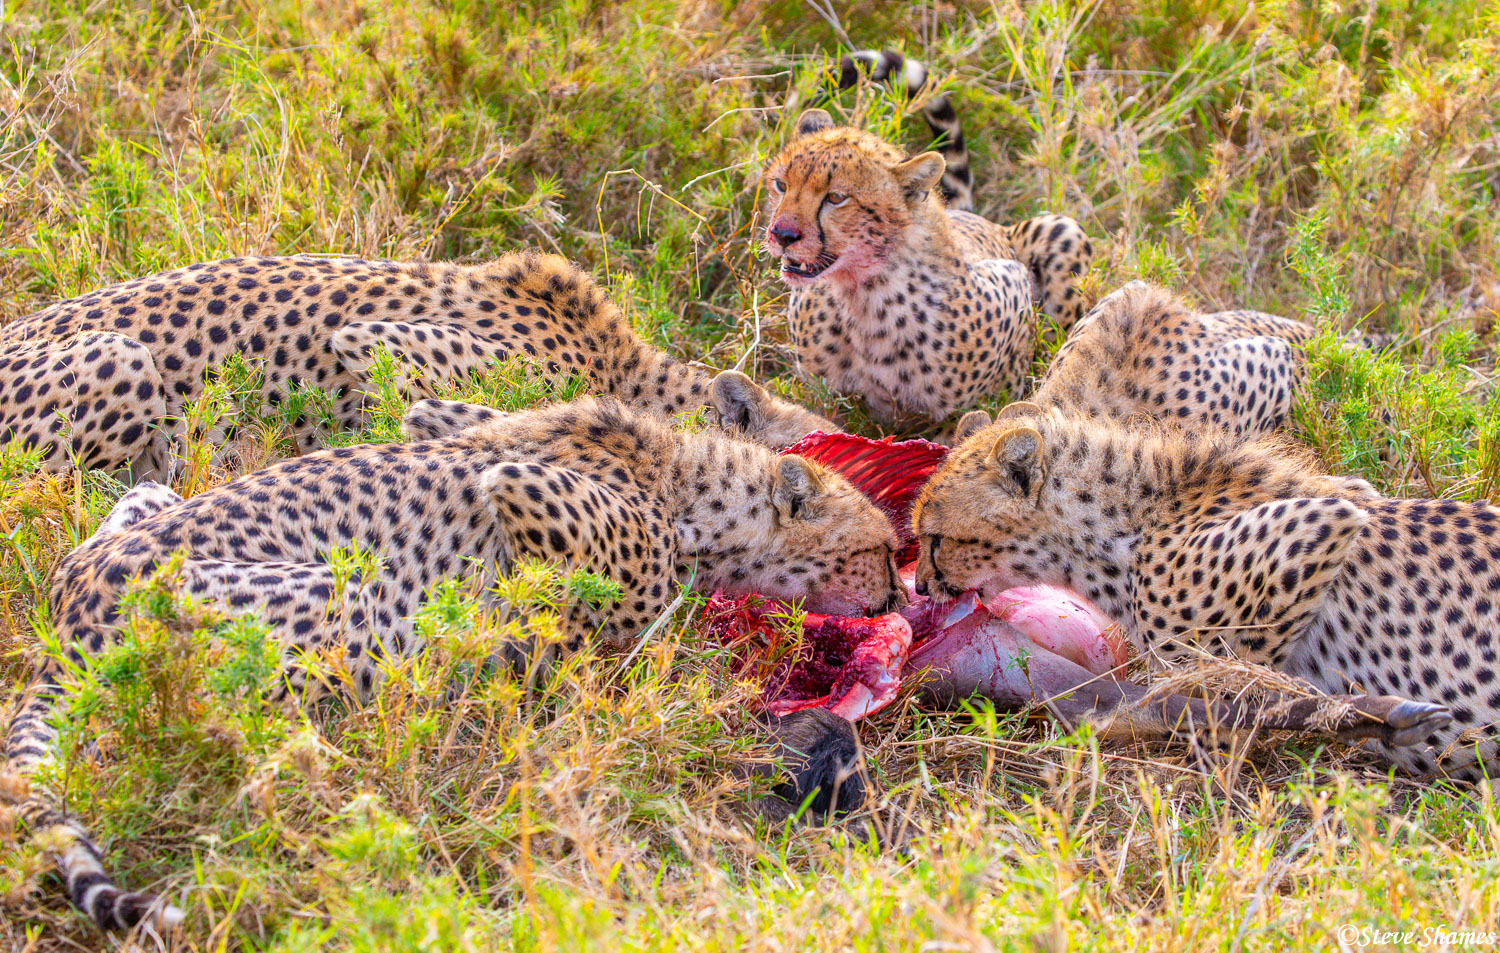 One cheetah takes a break, while the other four dig in.